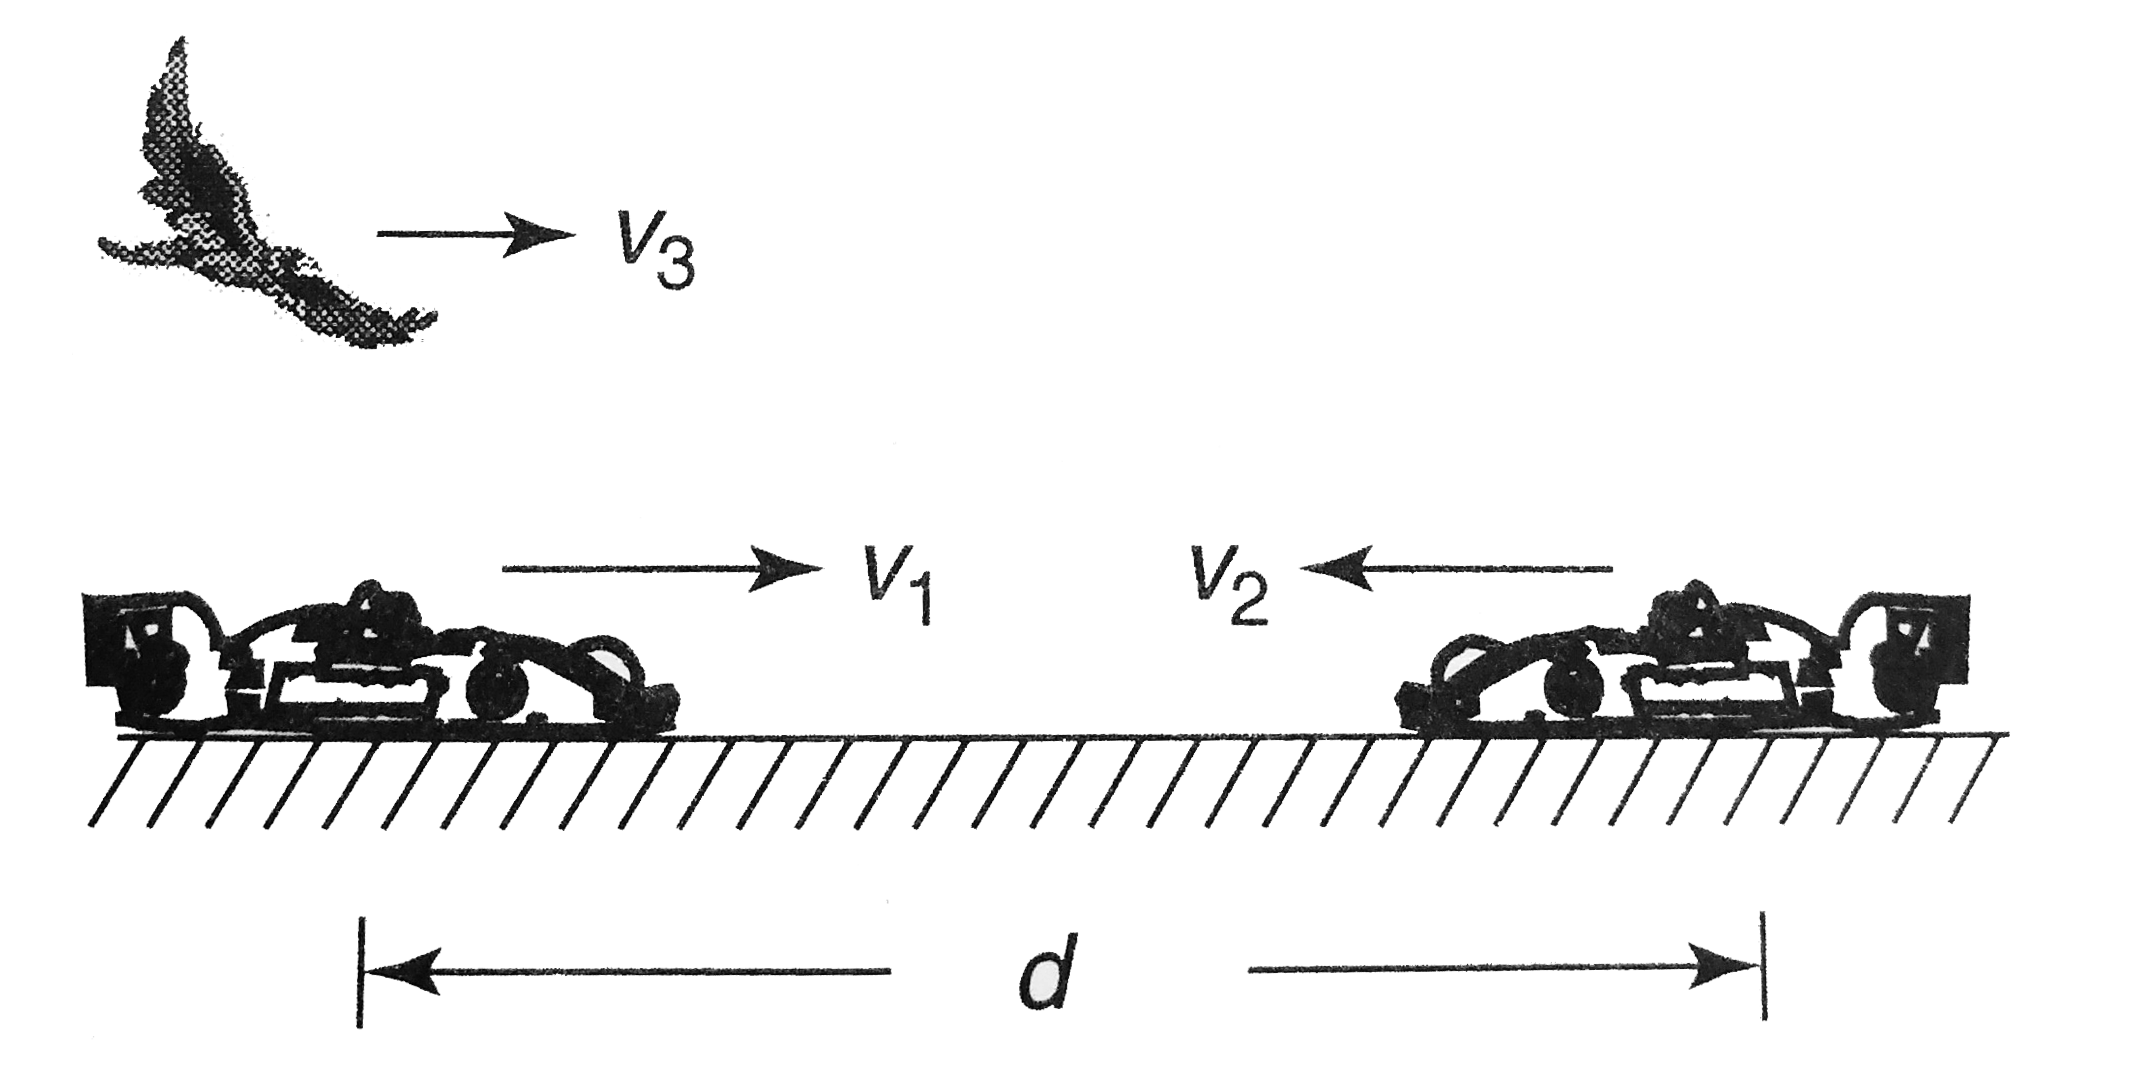 A bird flies to and fro between two cars which moves with velocities v1 = 20 m//s and v2 = 30 m//s. If the speed of the bird is v3 = 10 m//s and the initial distance of separation between them is d = 2 km, find the total distance covered by the bird till the cars meet.